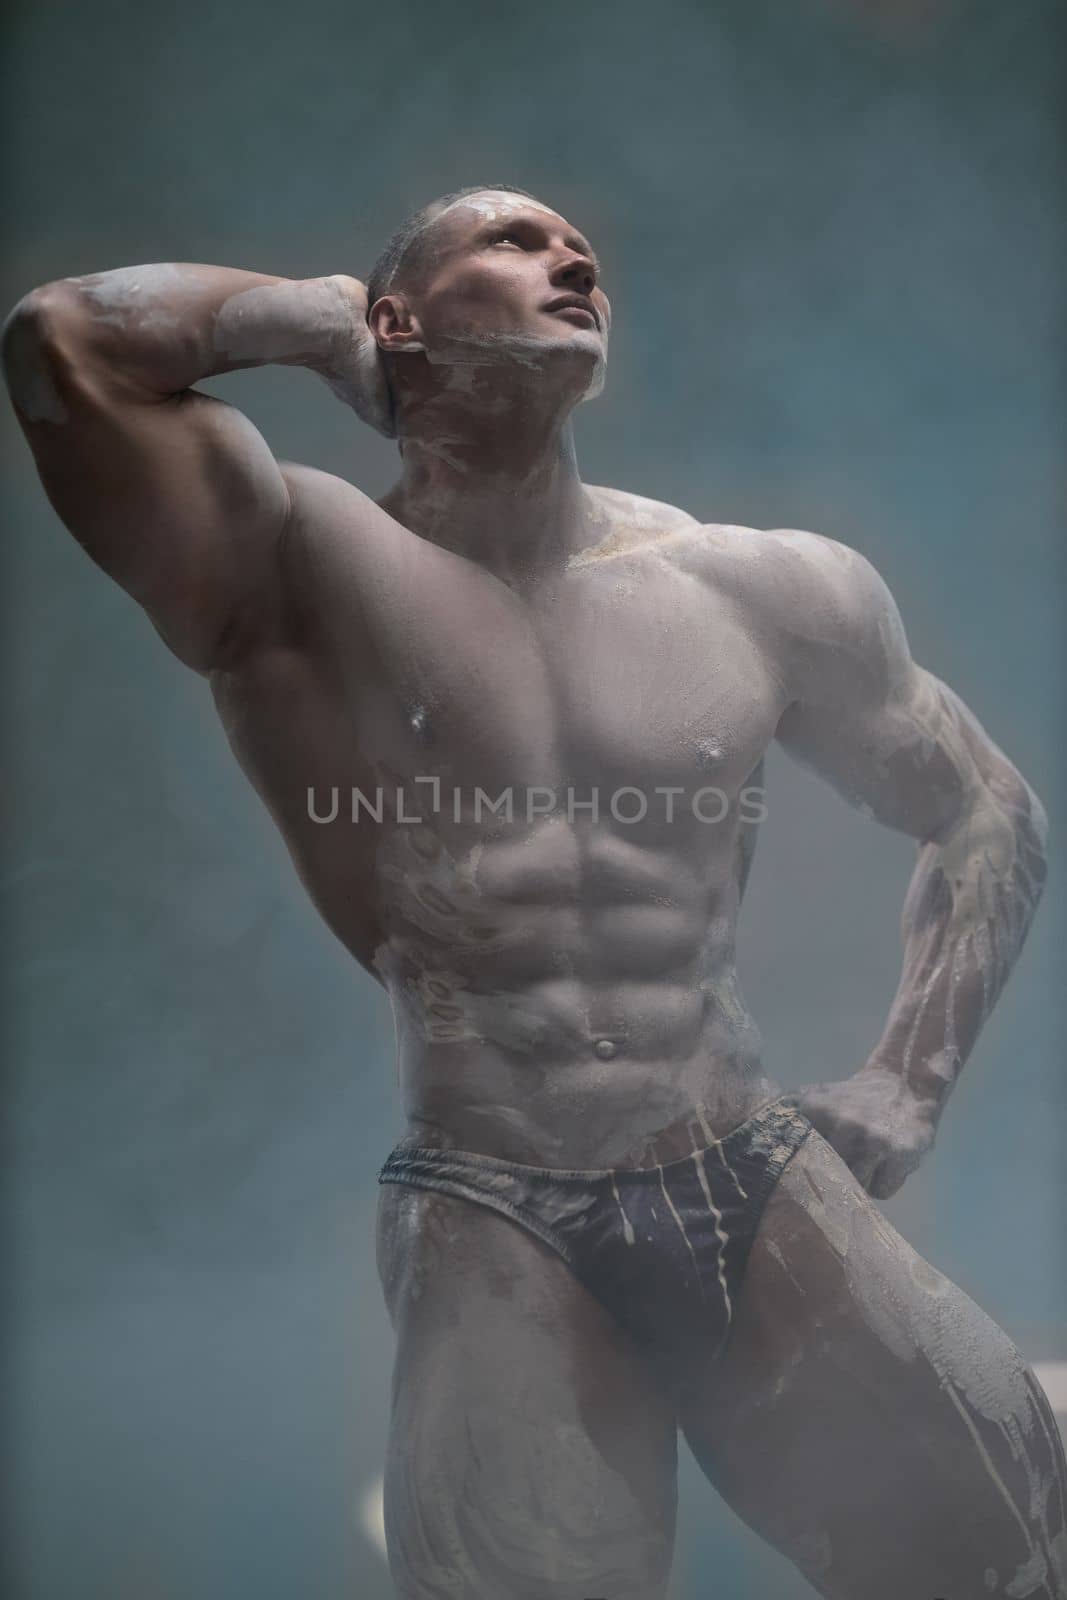 Studio shot of a muscular man. A muscular man shows off his perfect shirtless torso with his hand behind his head. Professional bodybuilder posing concept